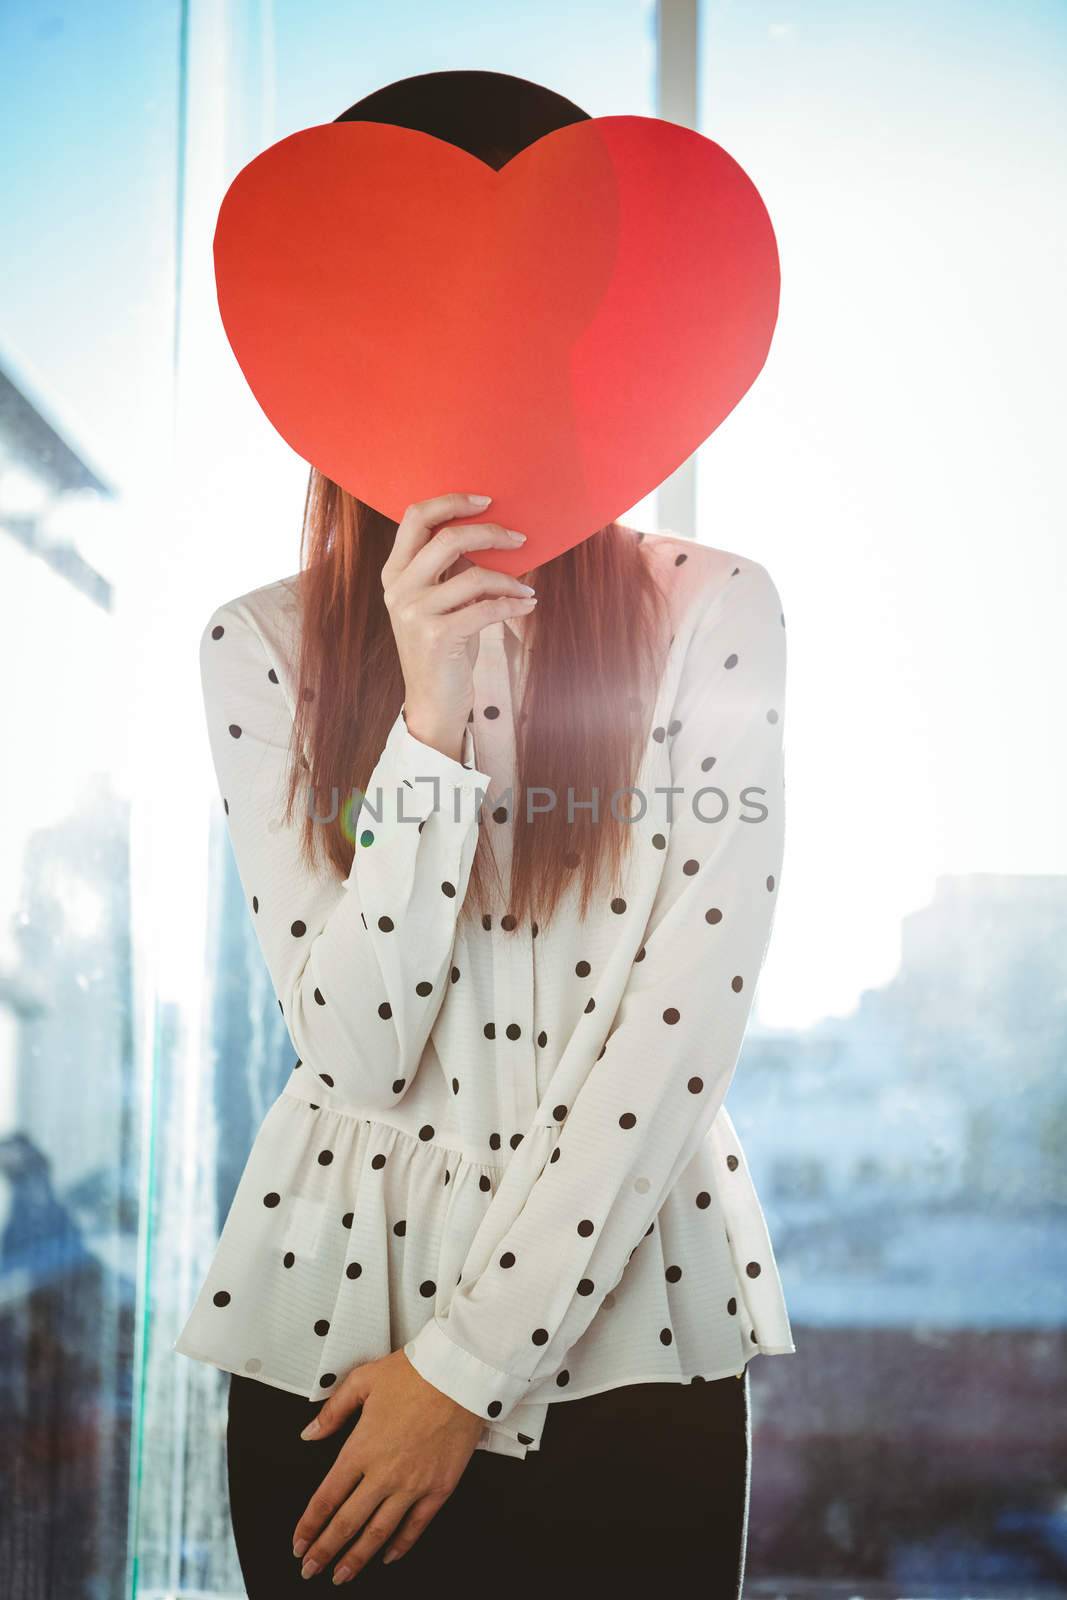 Attractive hipster woman behind a red heart in a bright room